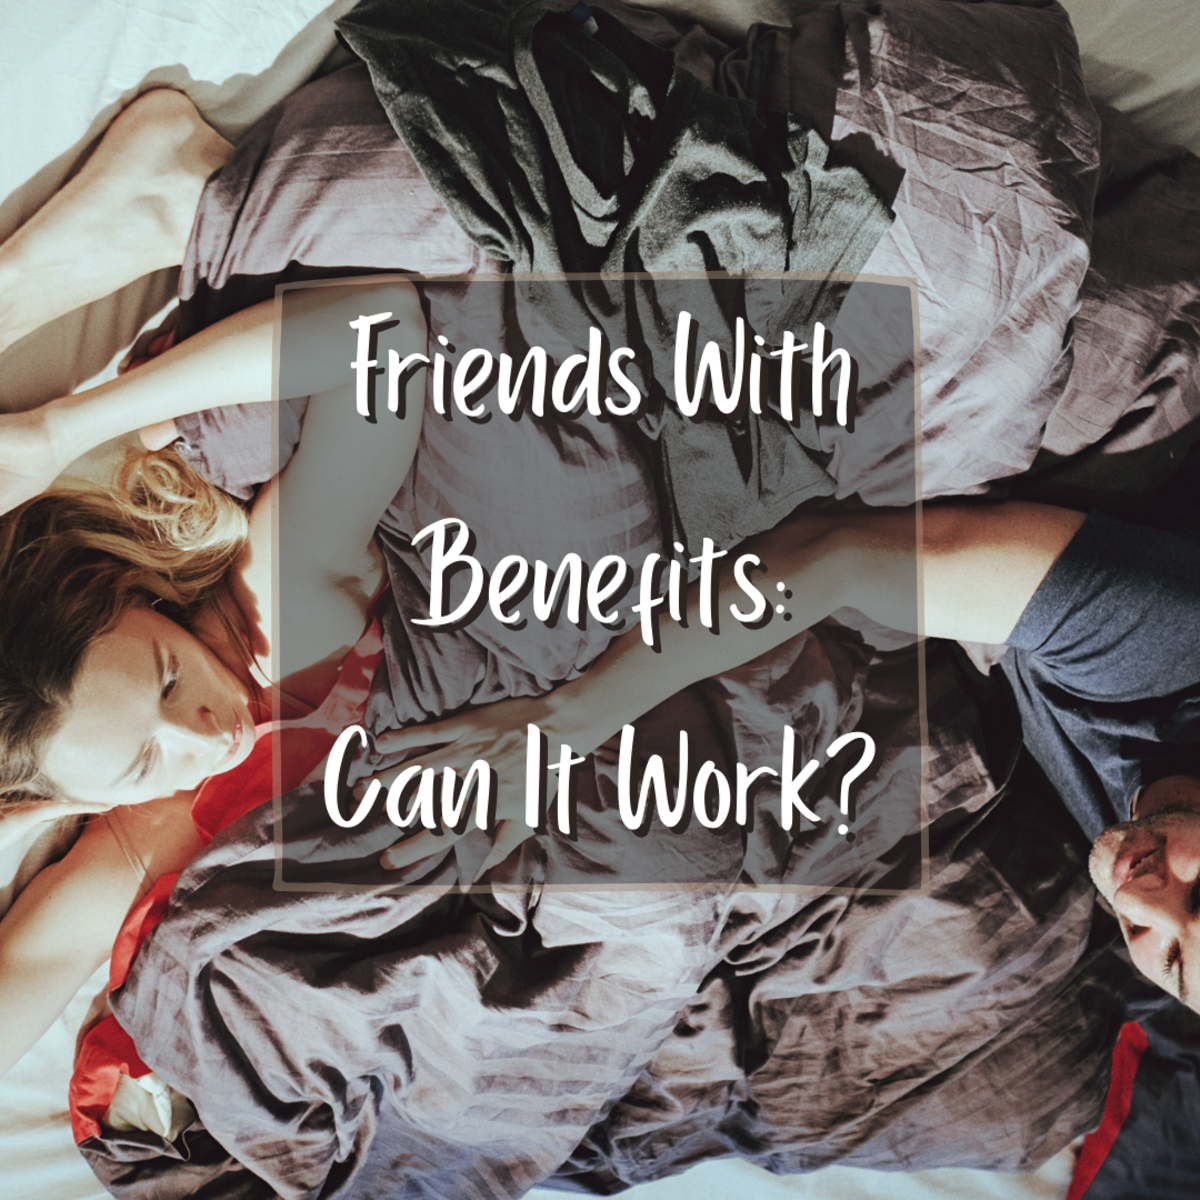 Can a friends with benefits relationship really work? Find out what you should know before you try one.